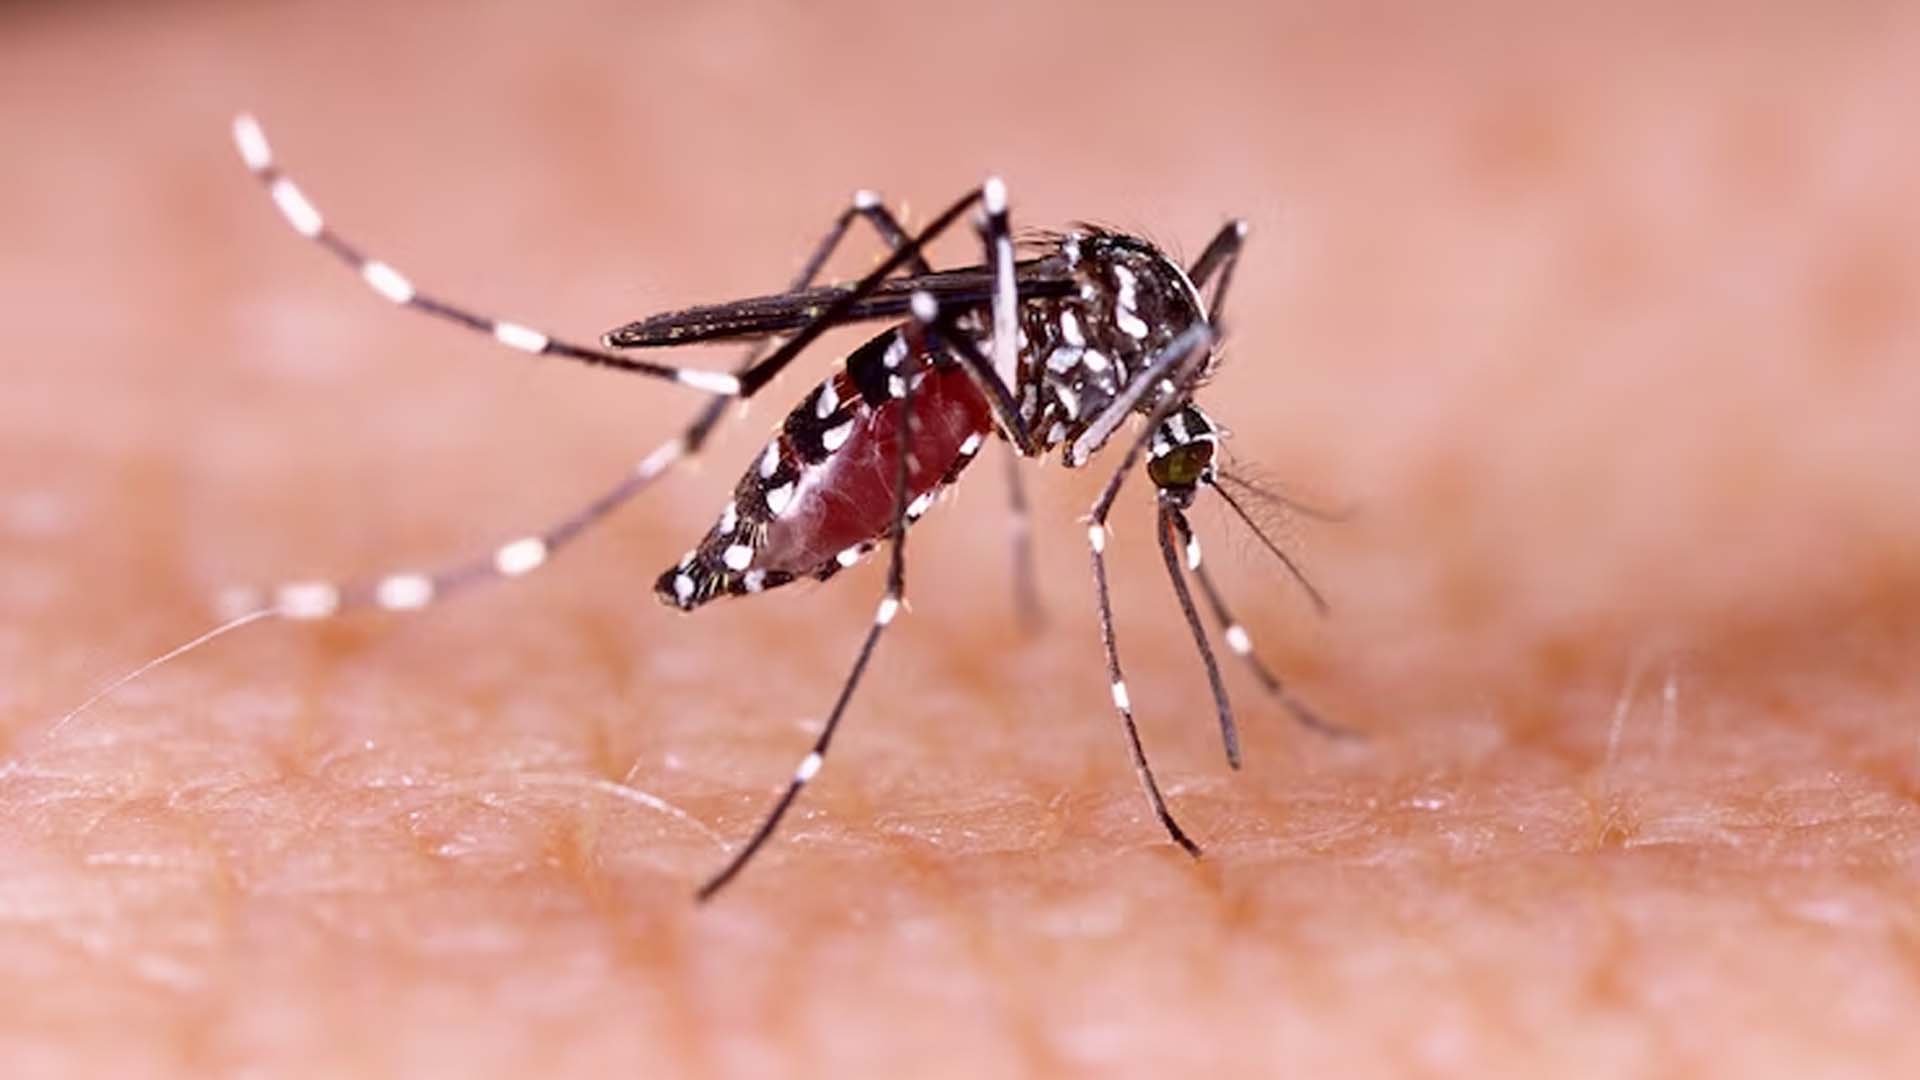 Which Mosquito Causes Dengue?